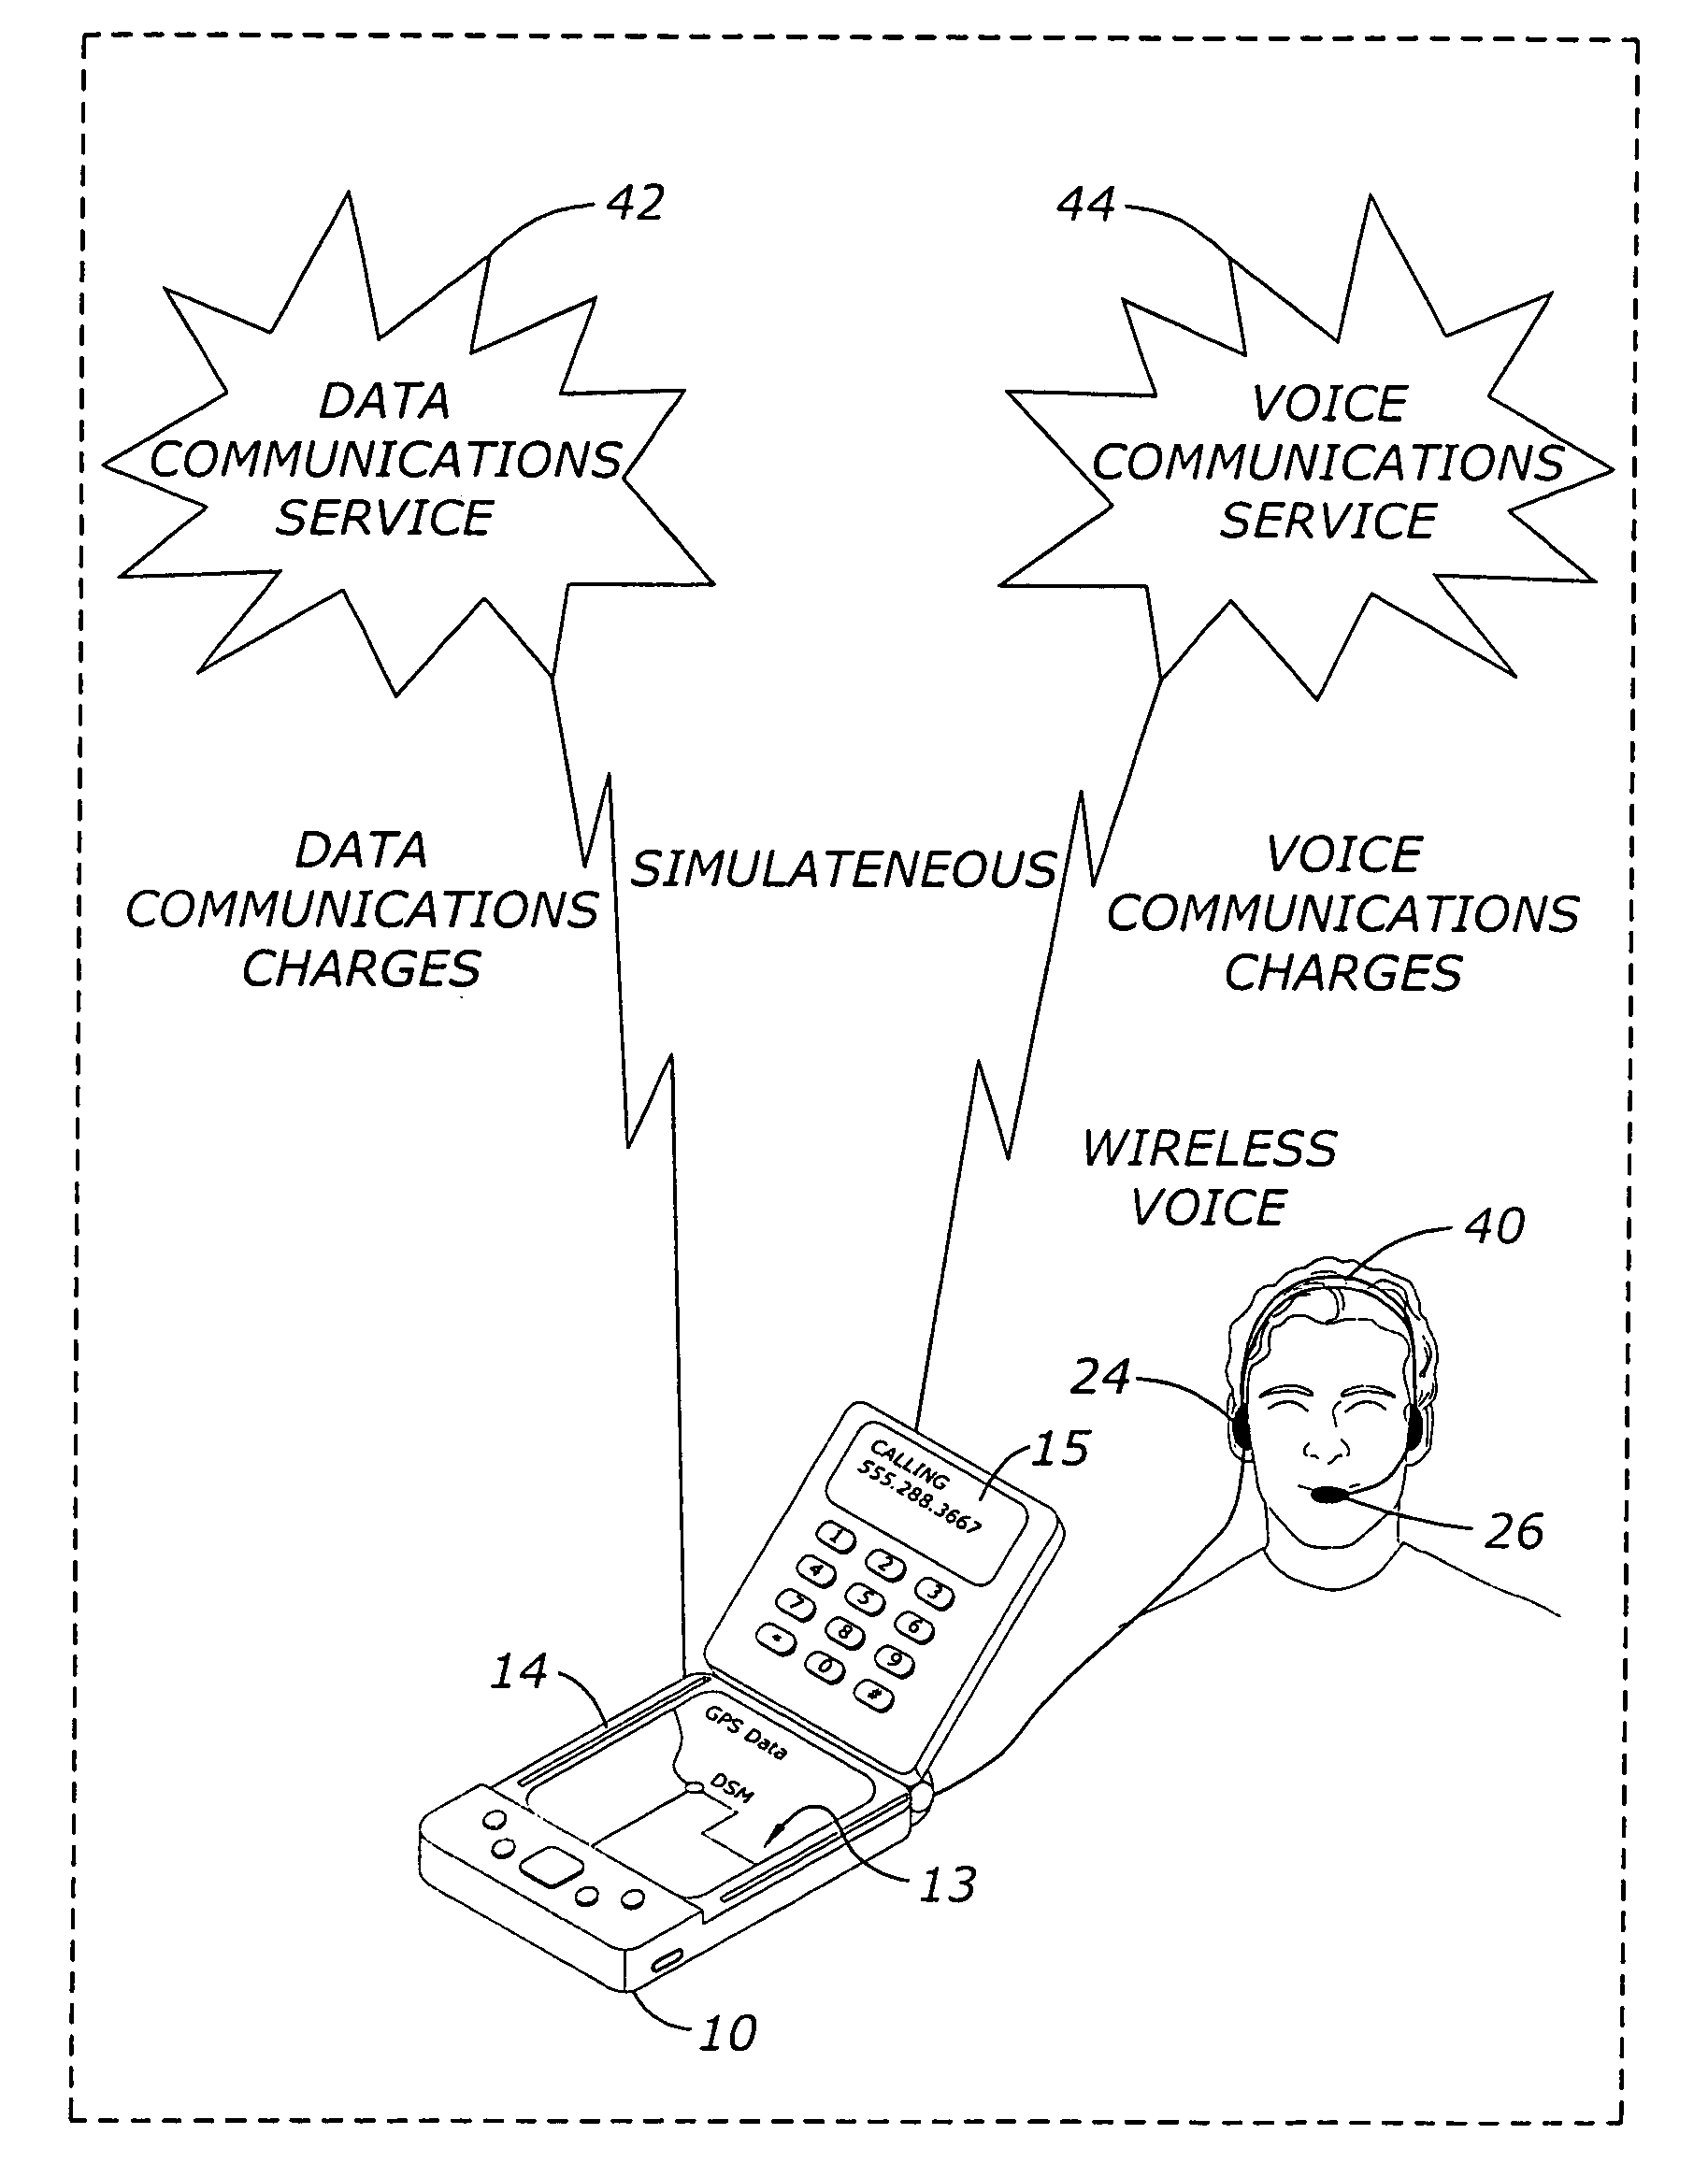 Cellular telephone, personal digital assistant with dual lines for simultaneous uses